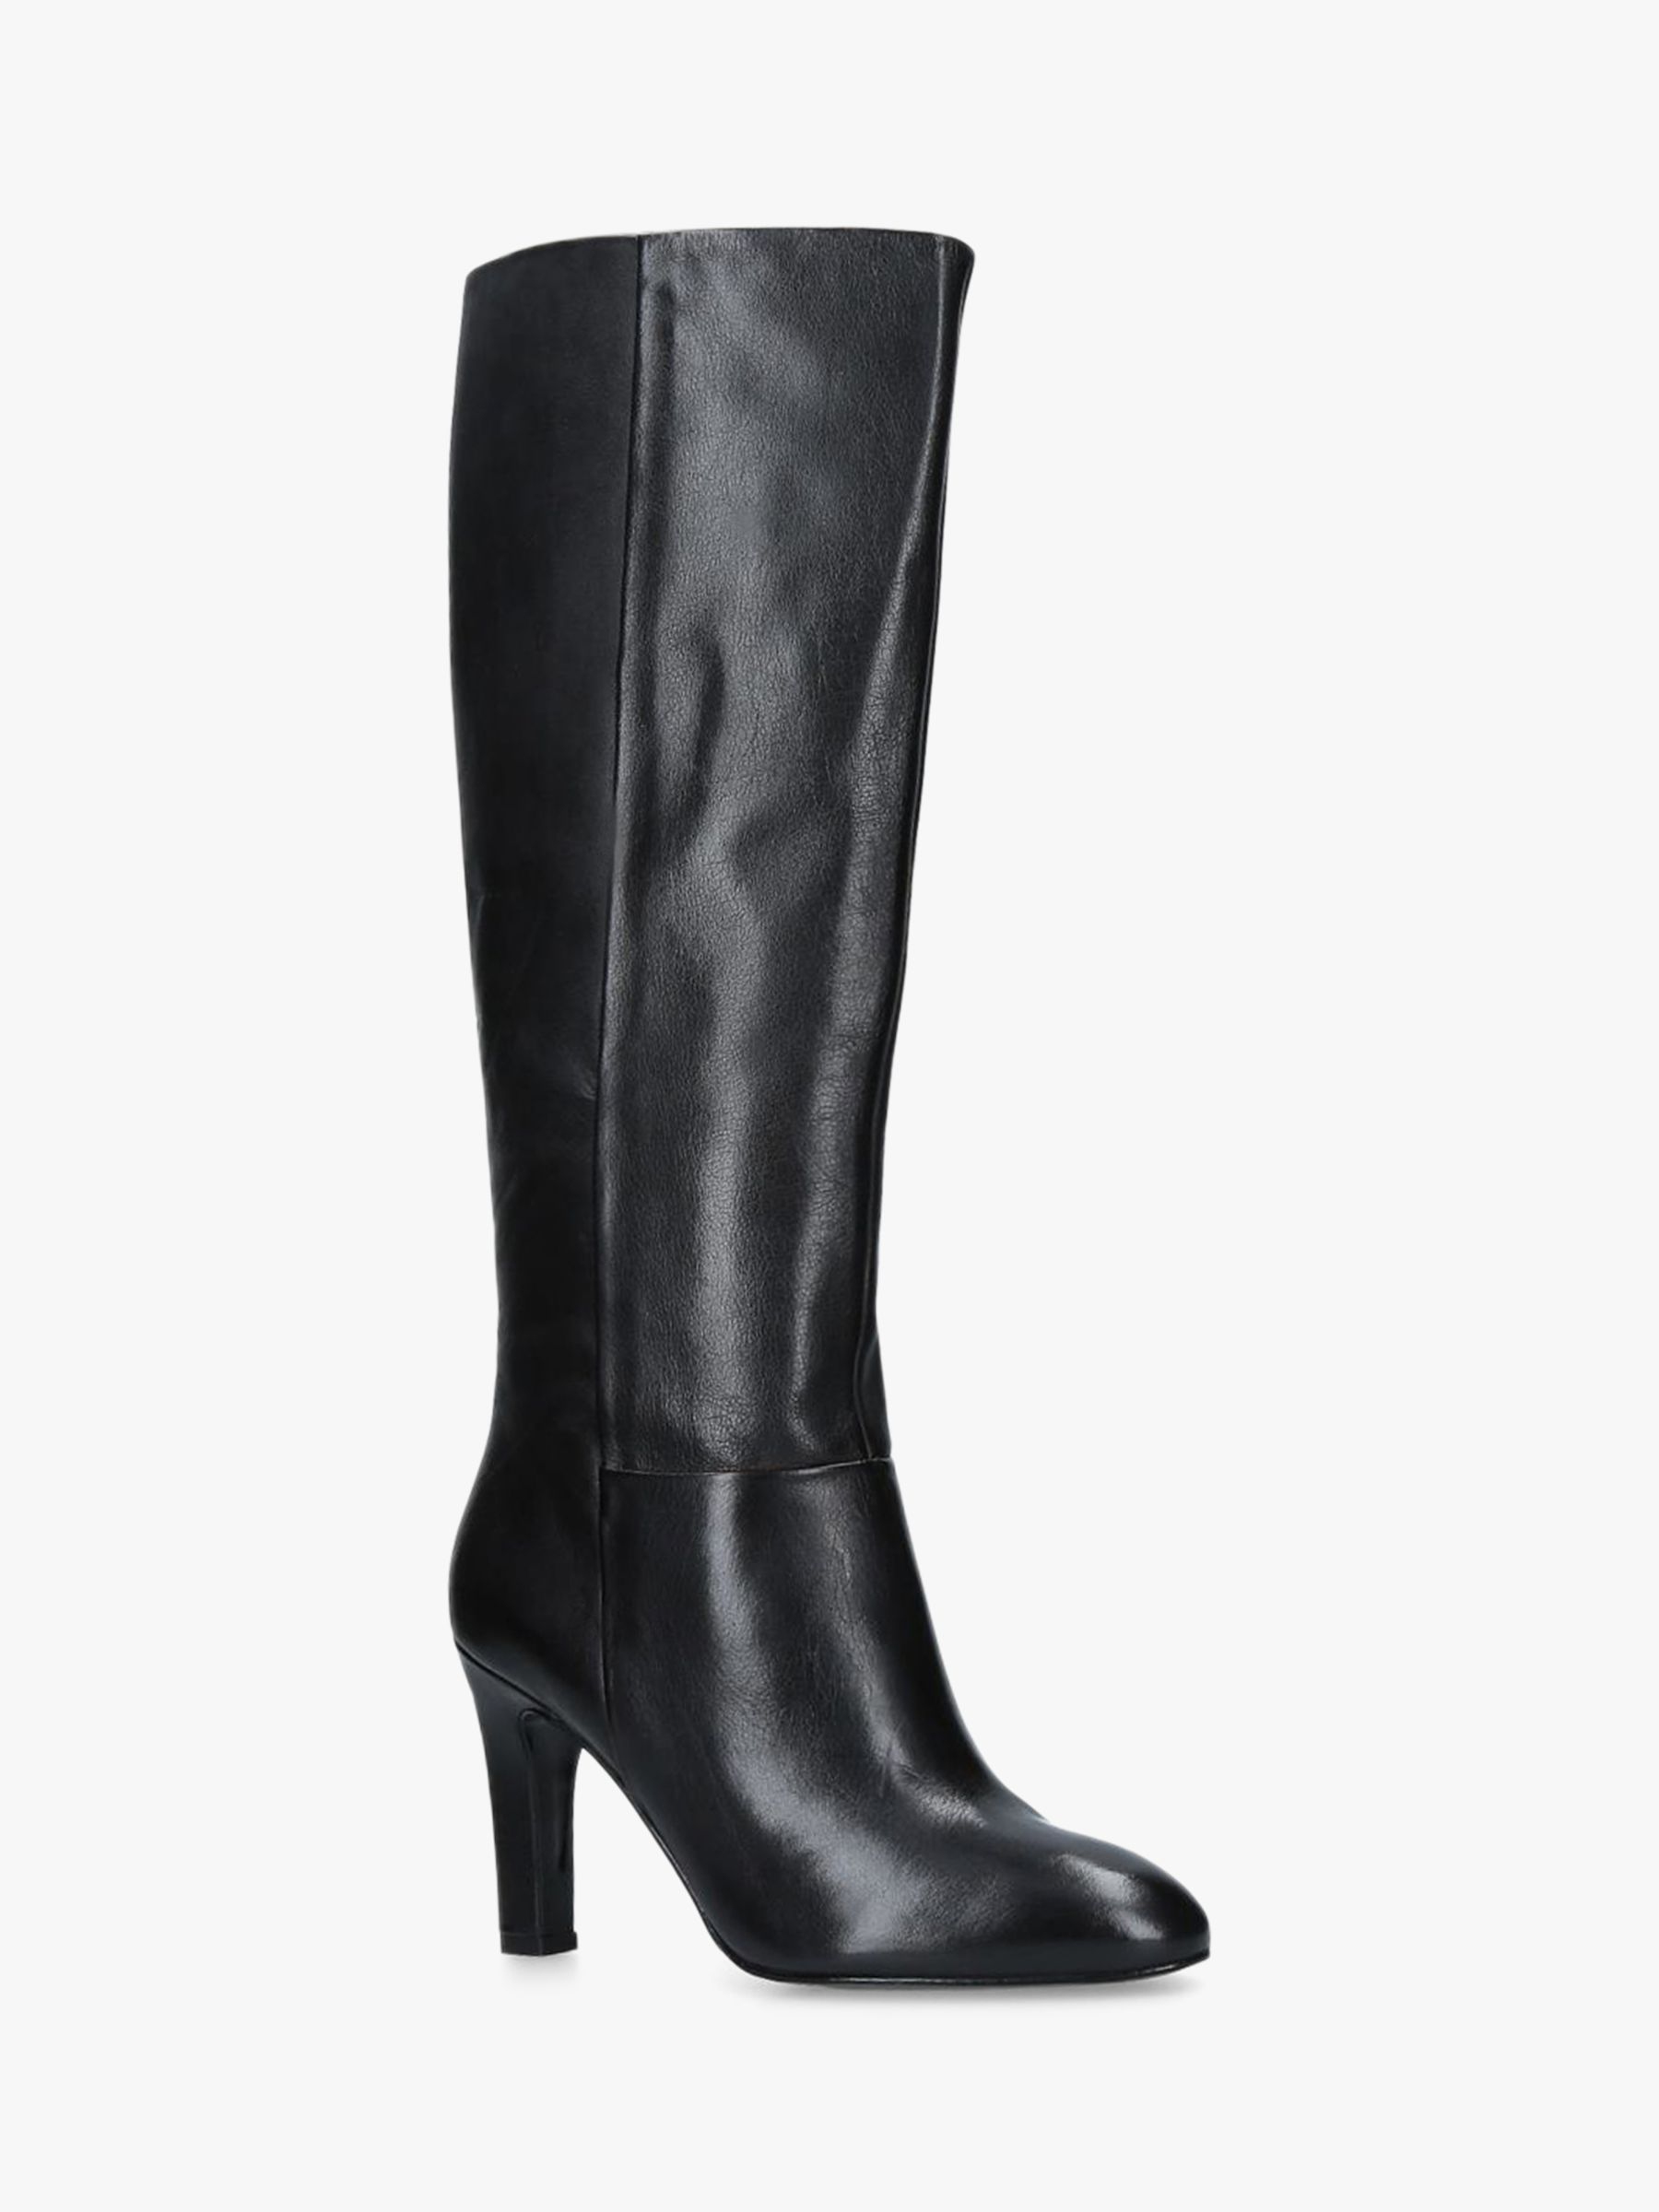 Carvela Where Leather Knee High Boots